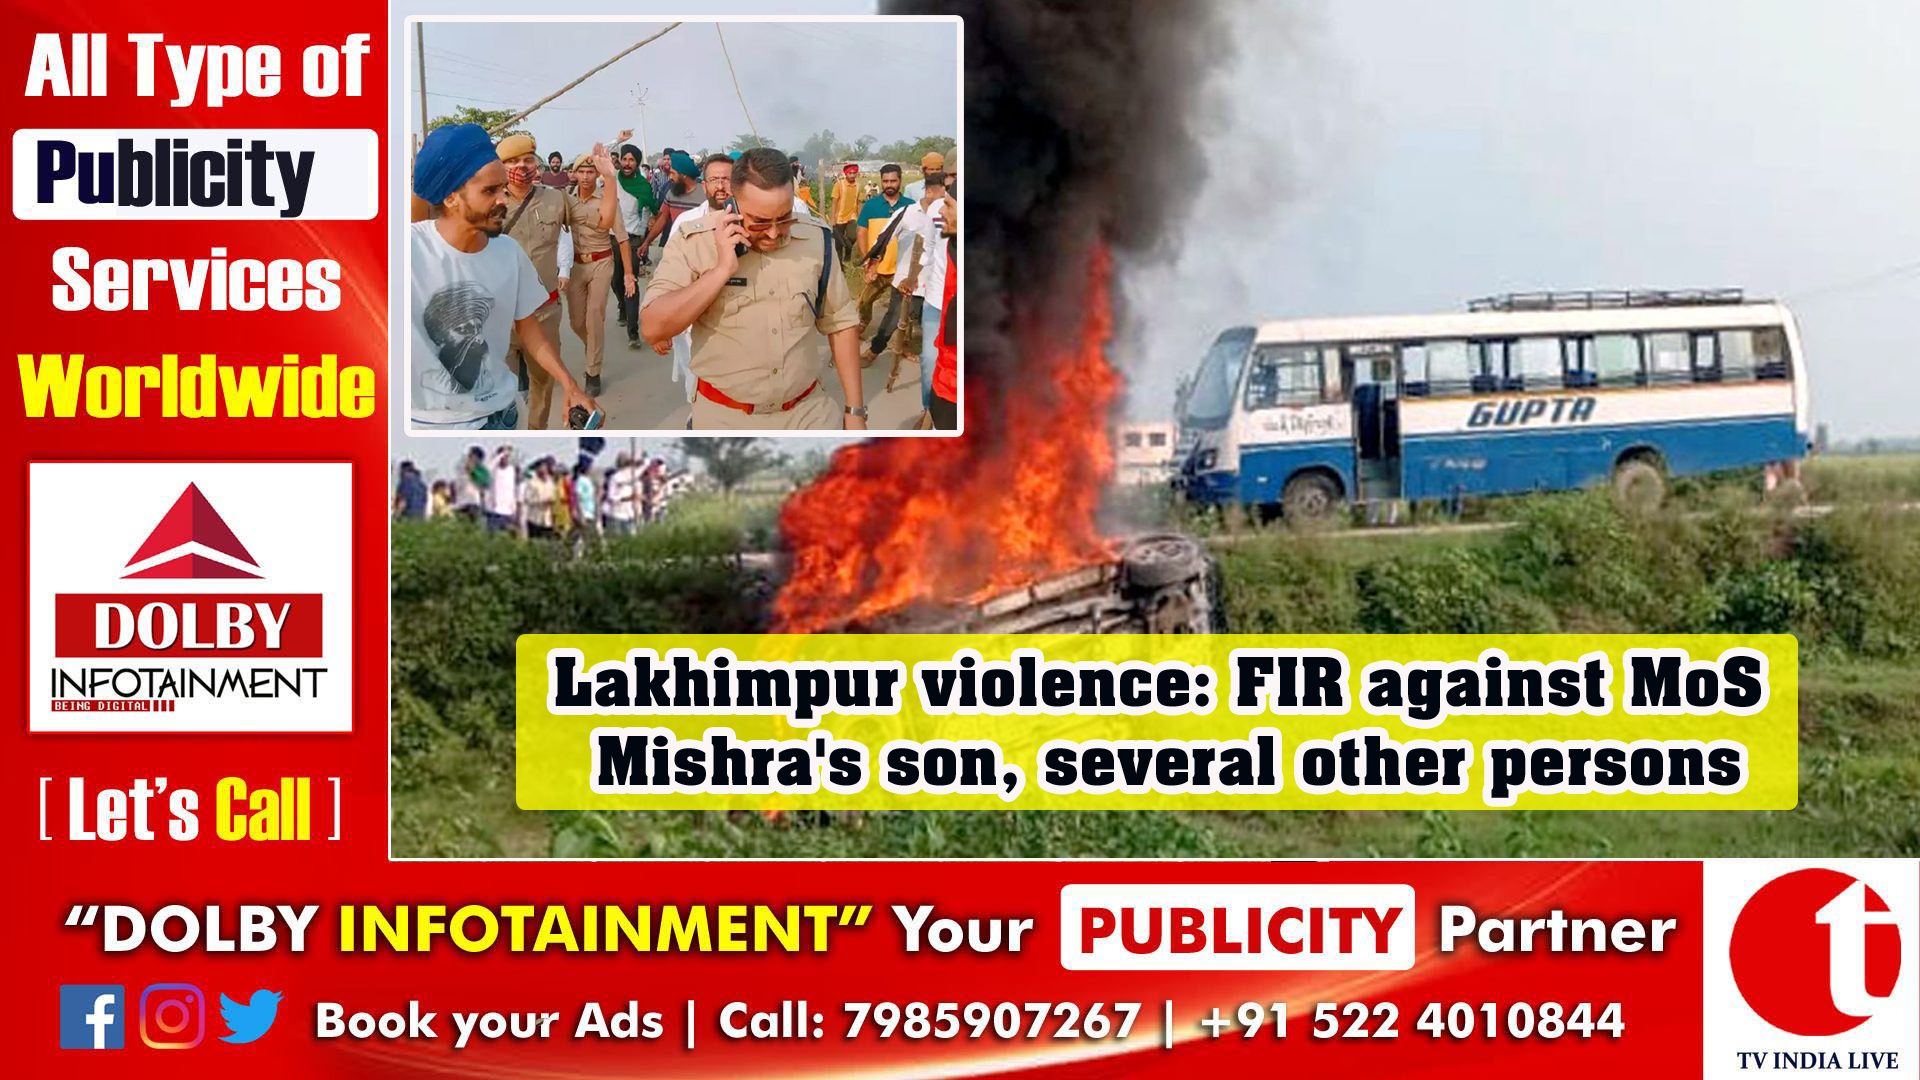 Lakhimpur violence: FIR against MoS Mishra's son, several other persons